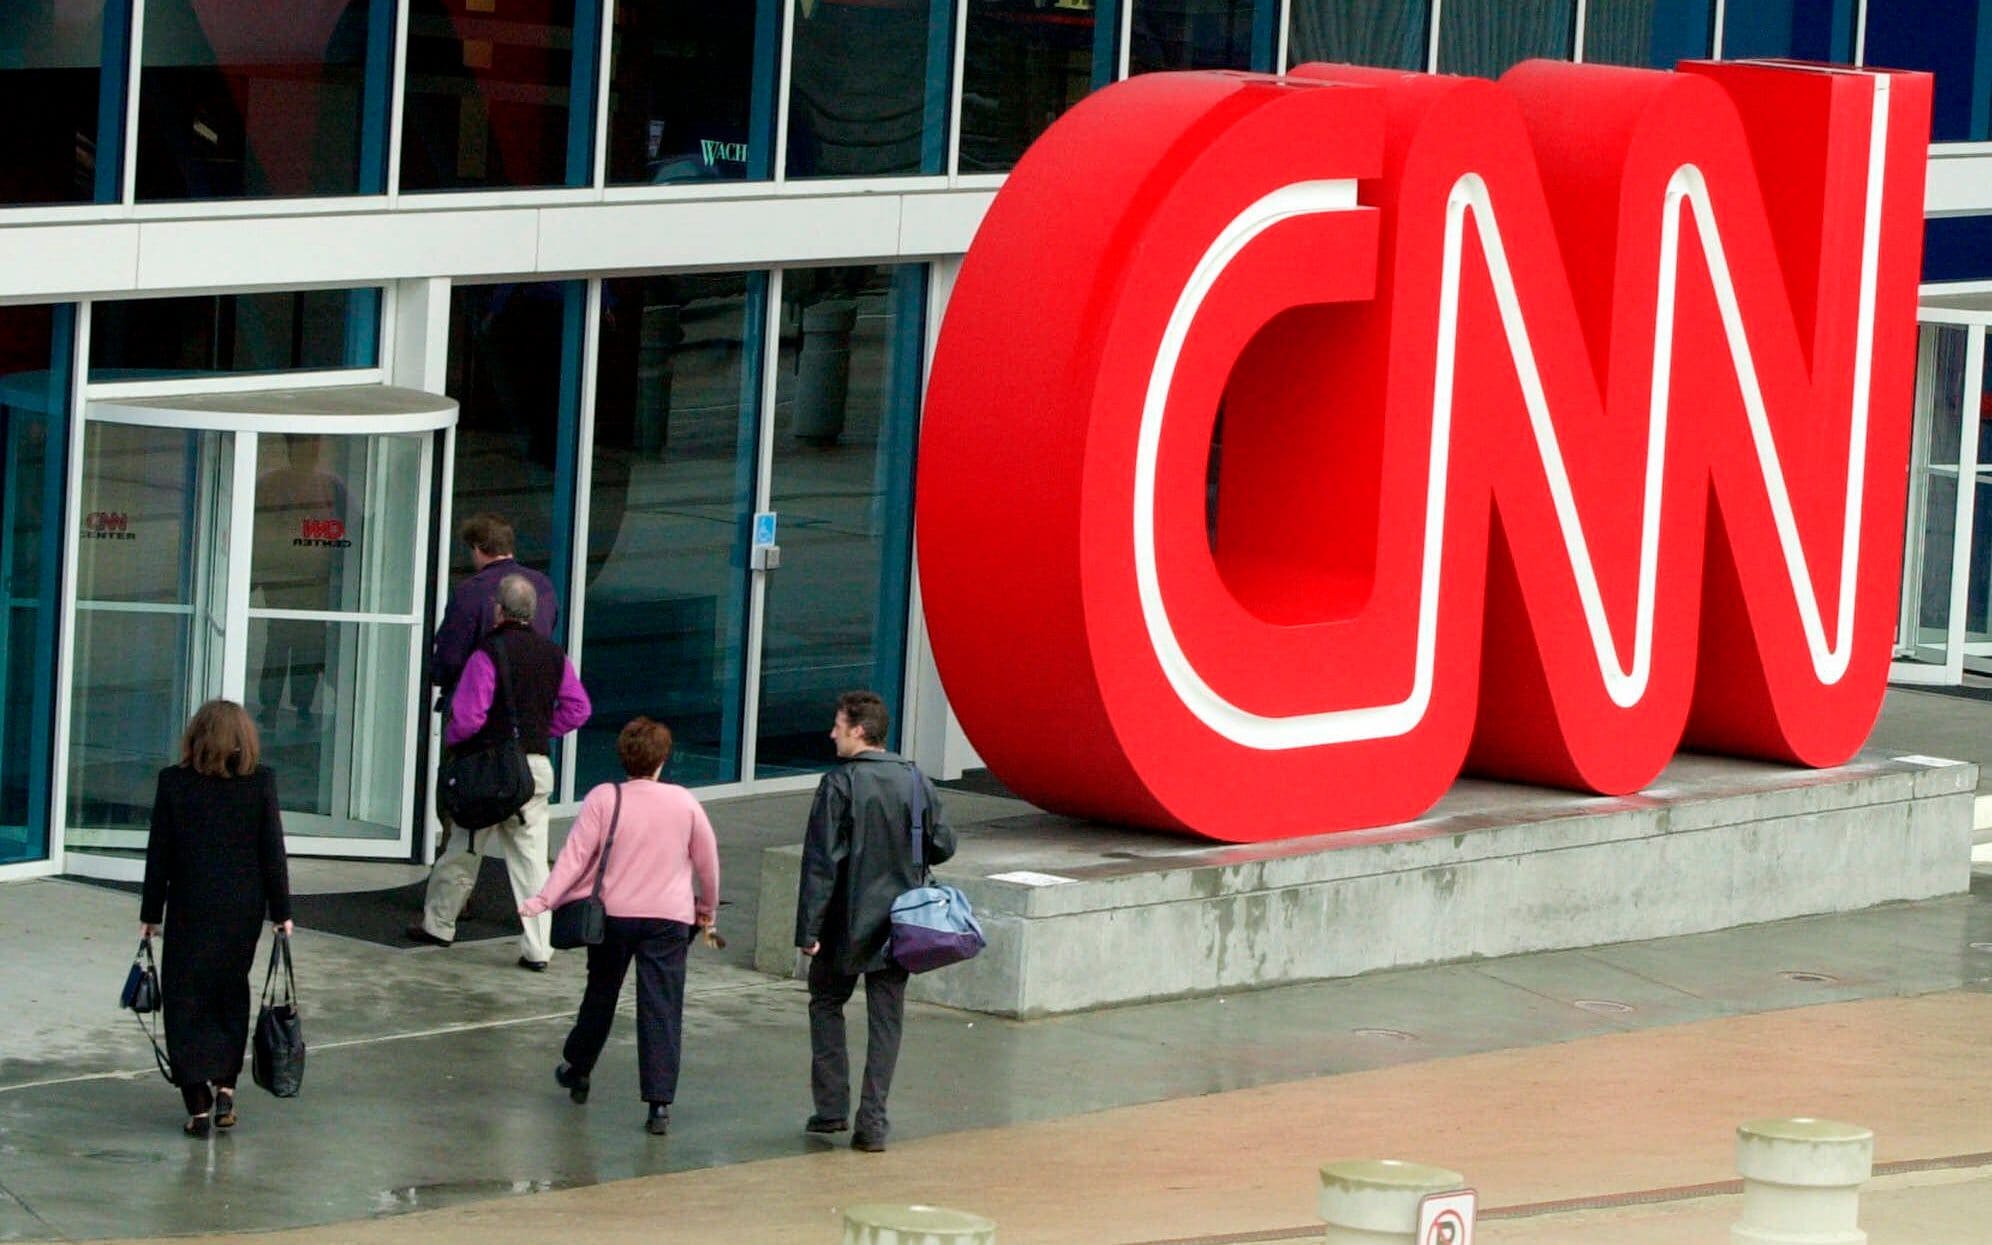 CNN fires three employees for coming to work unvaccinated